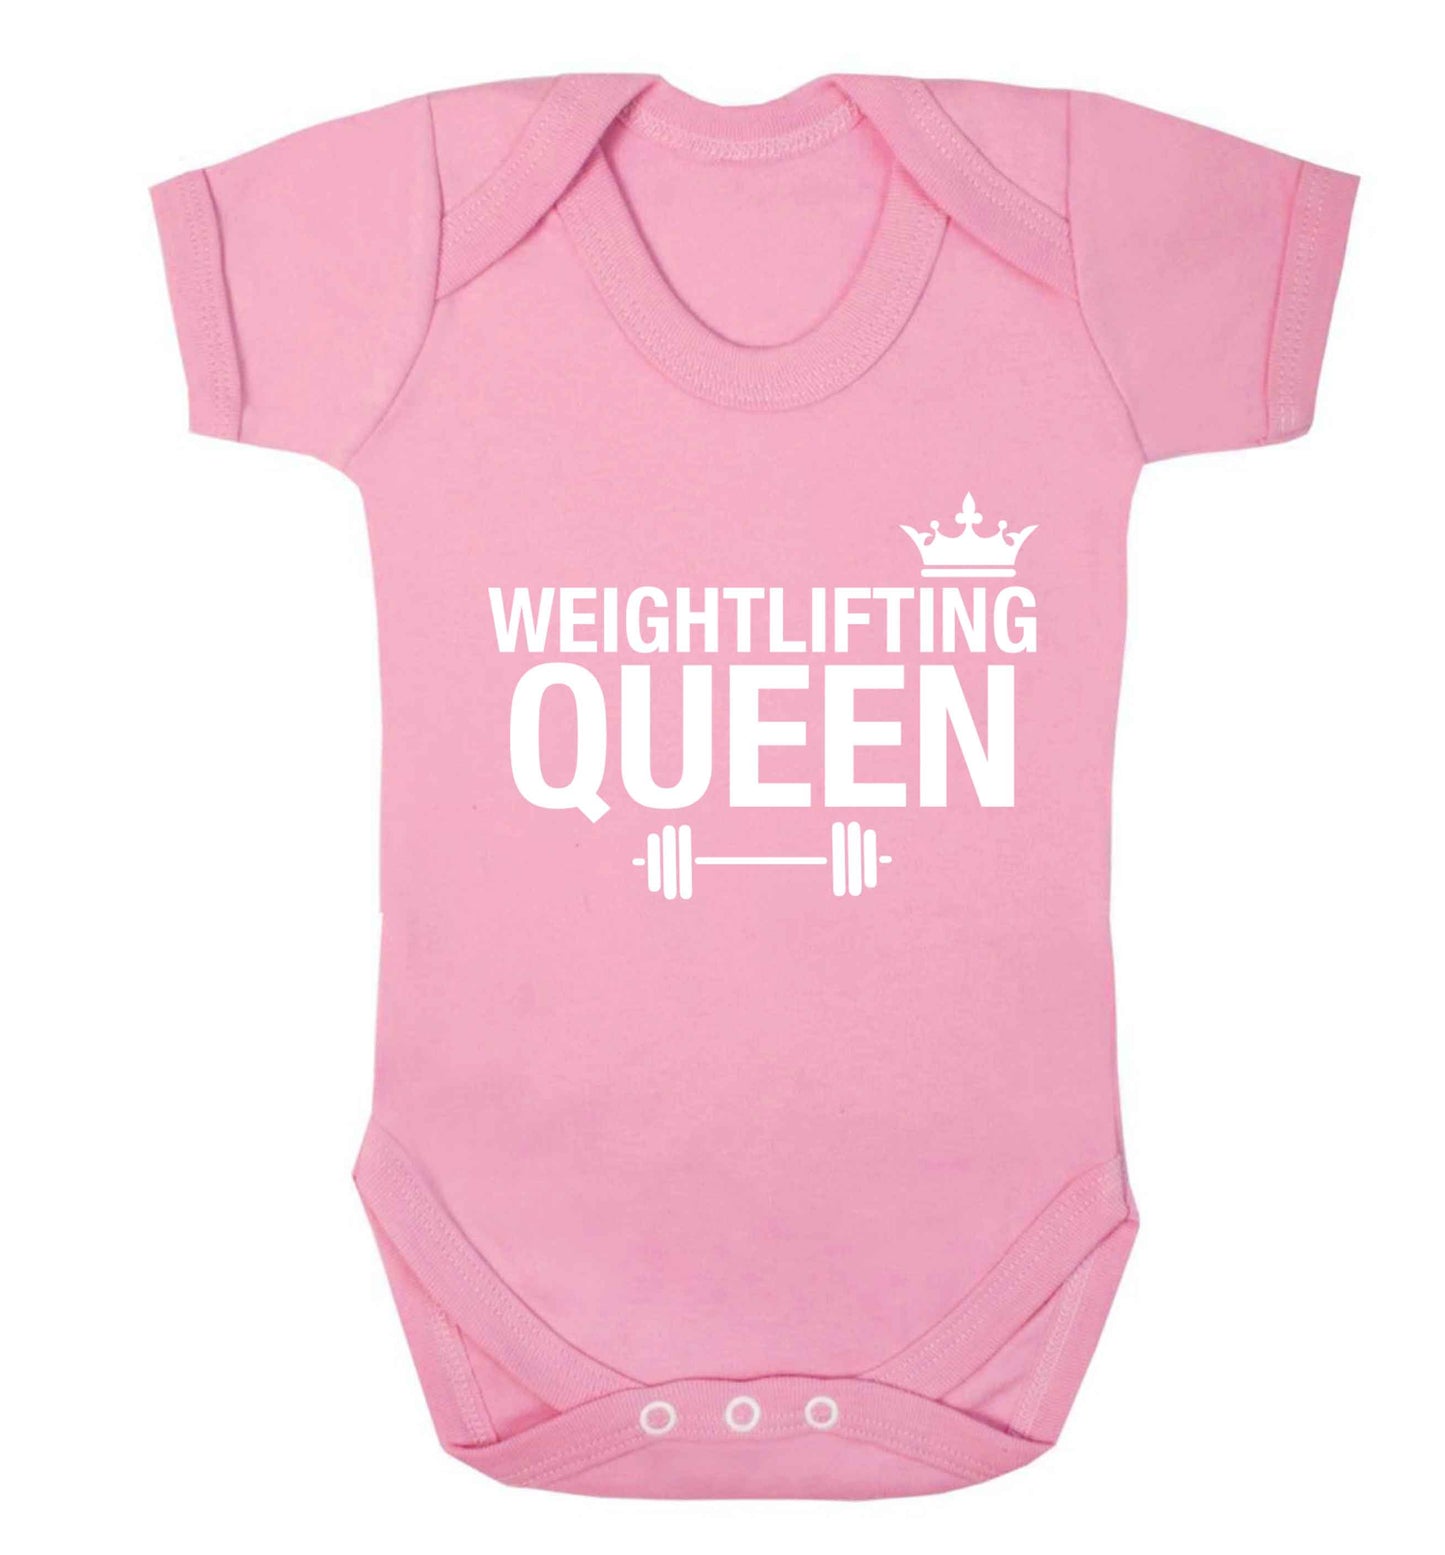 Weightlifting Queen Baby Vest pale pink 18-24 months